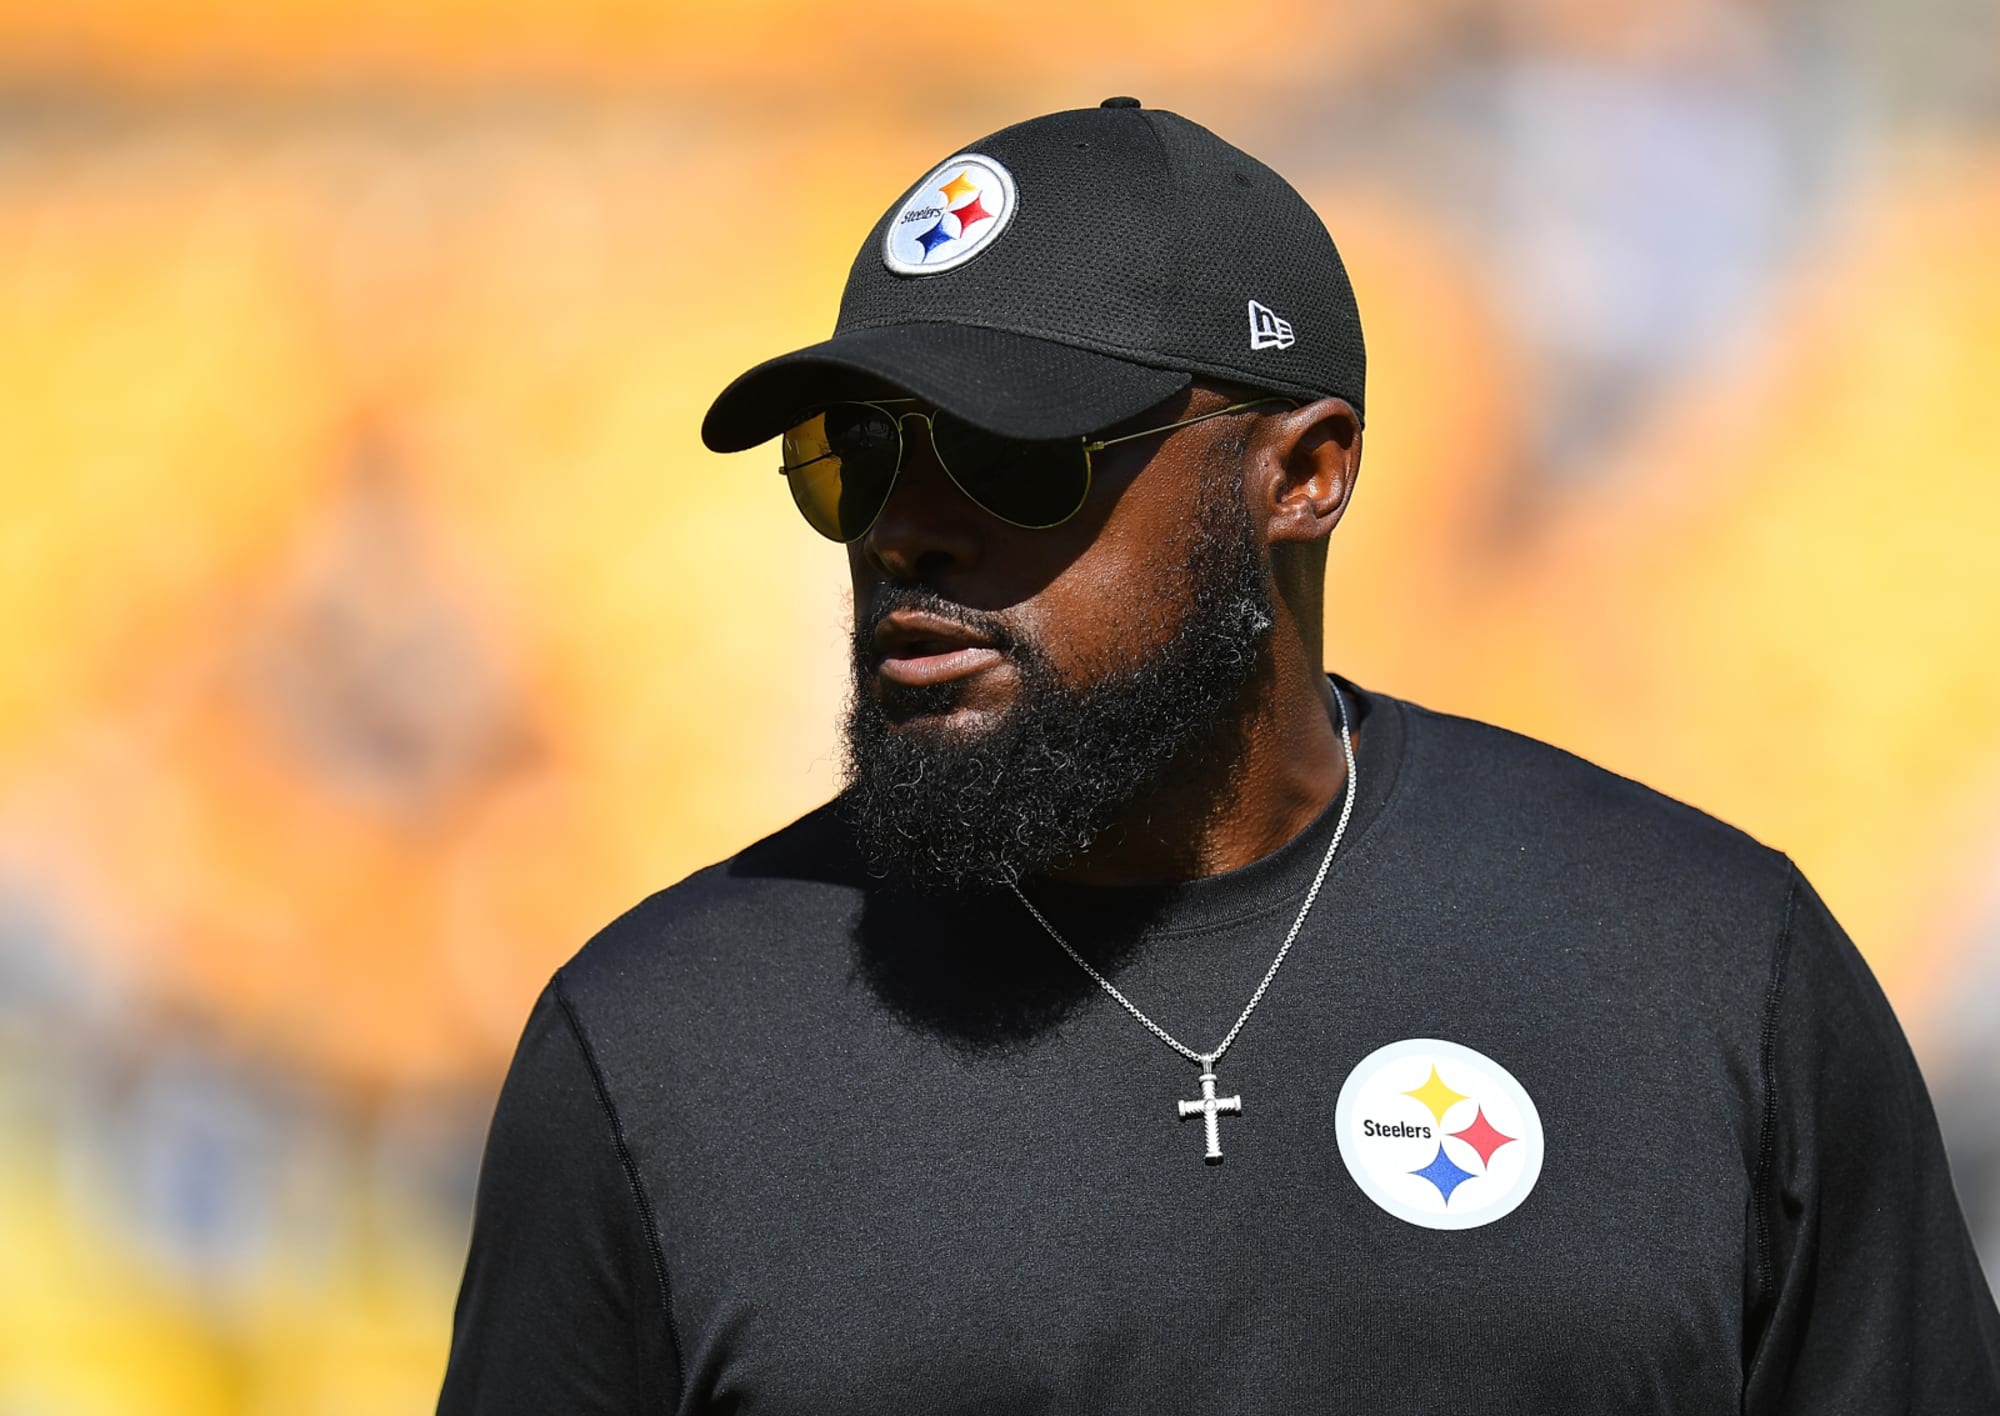 Steelers, Patriots trying to survive on coaching without quarterbacks